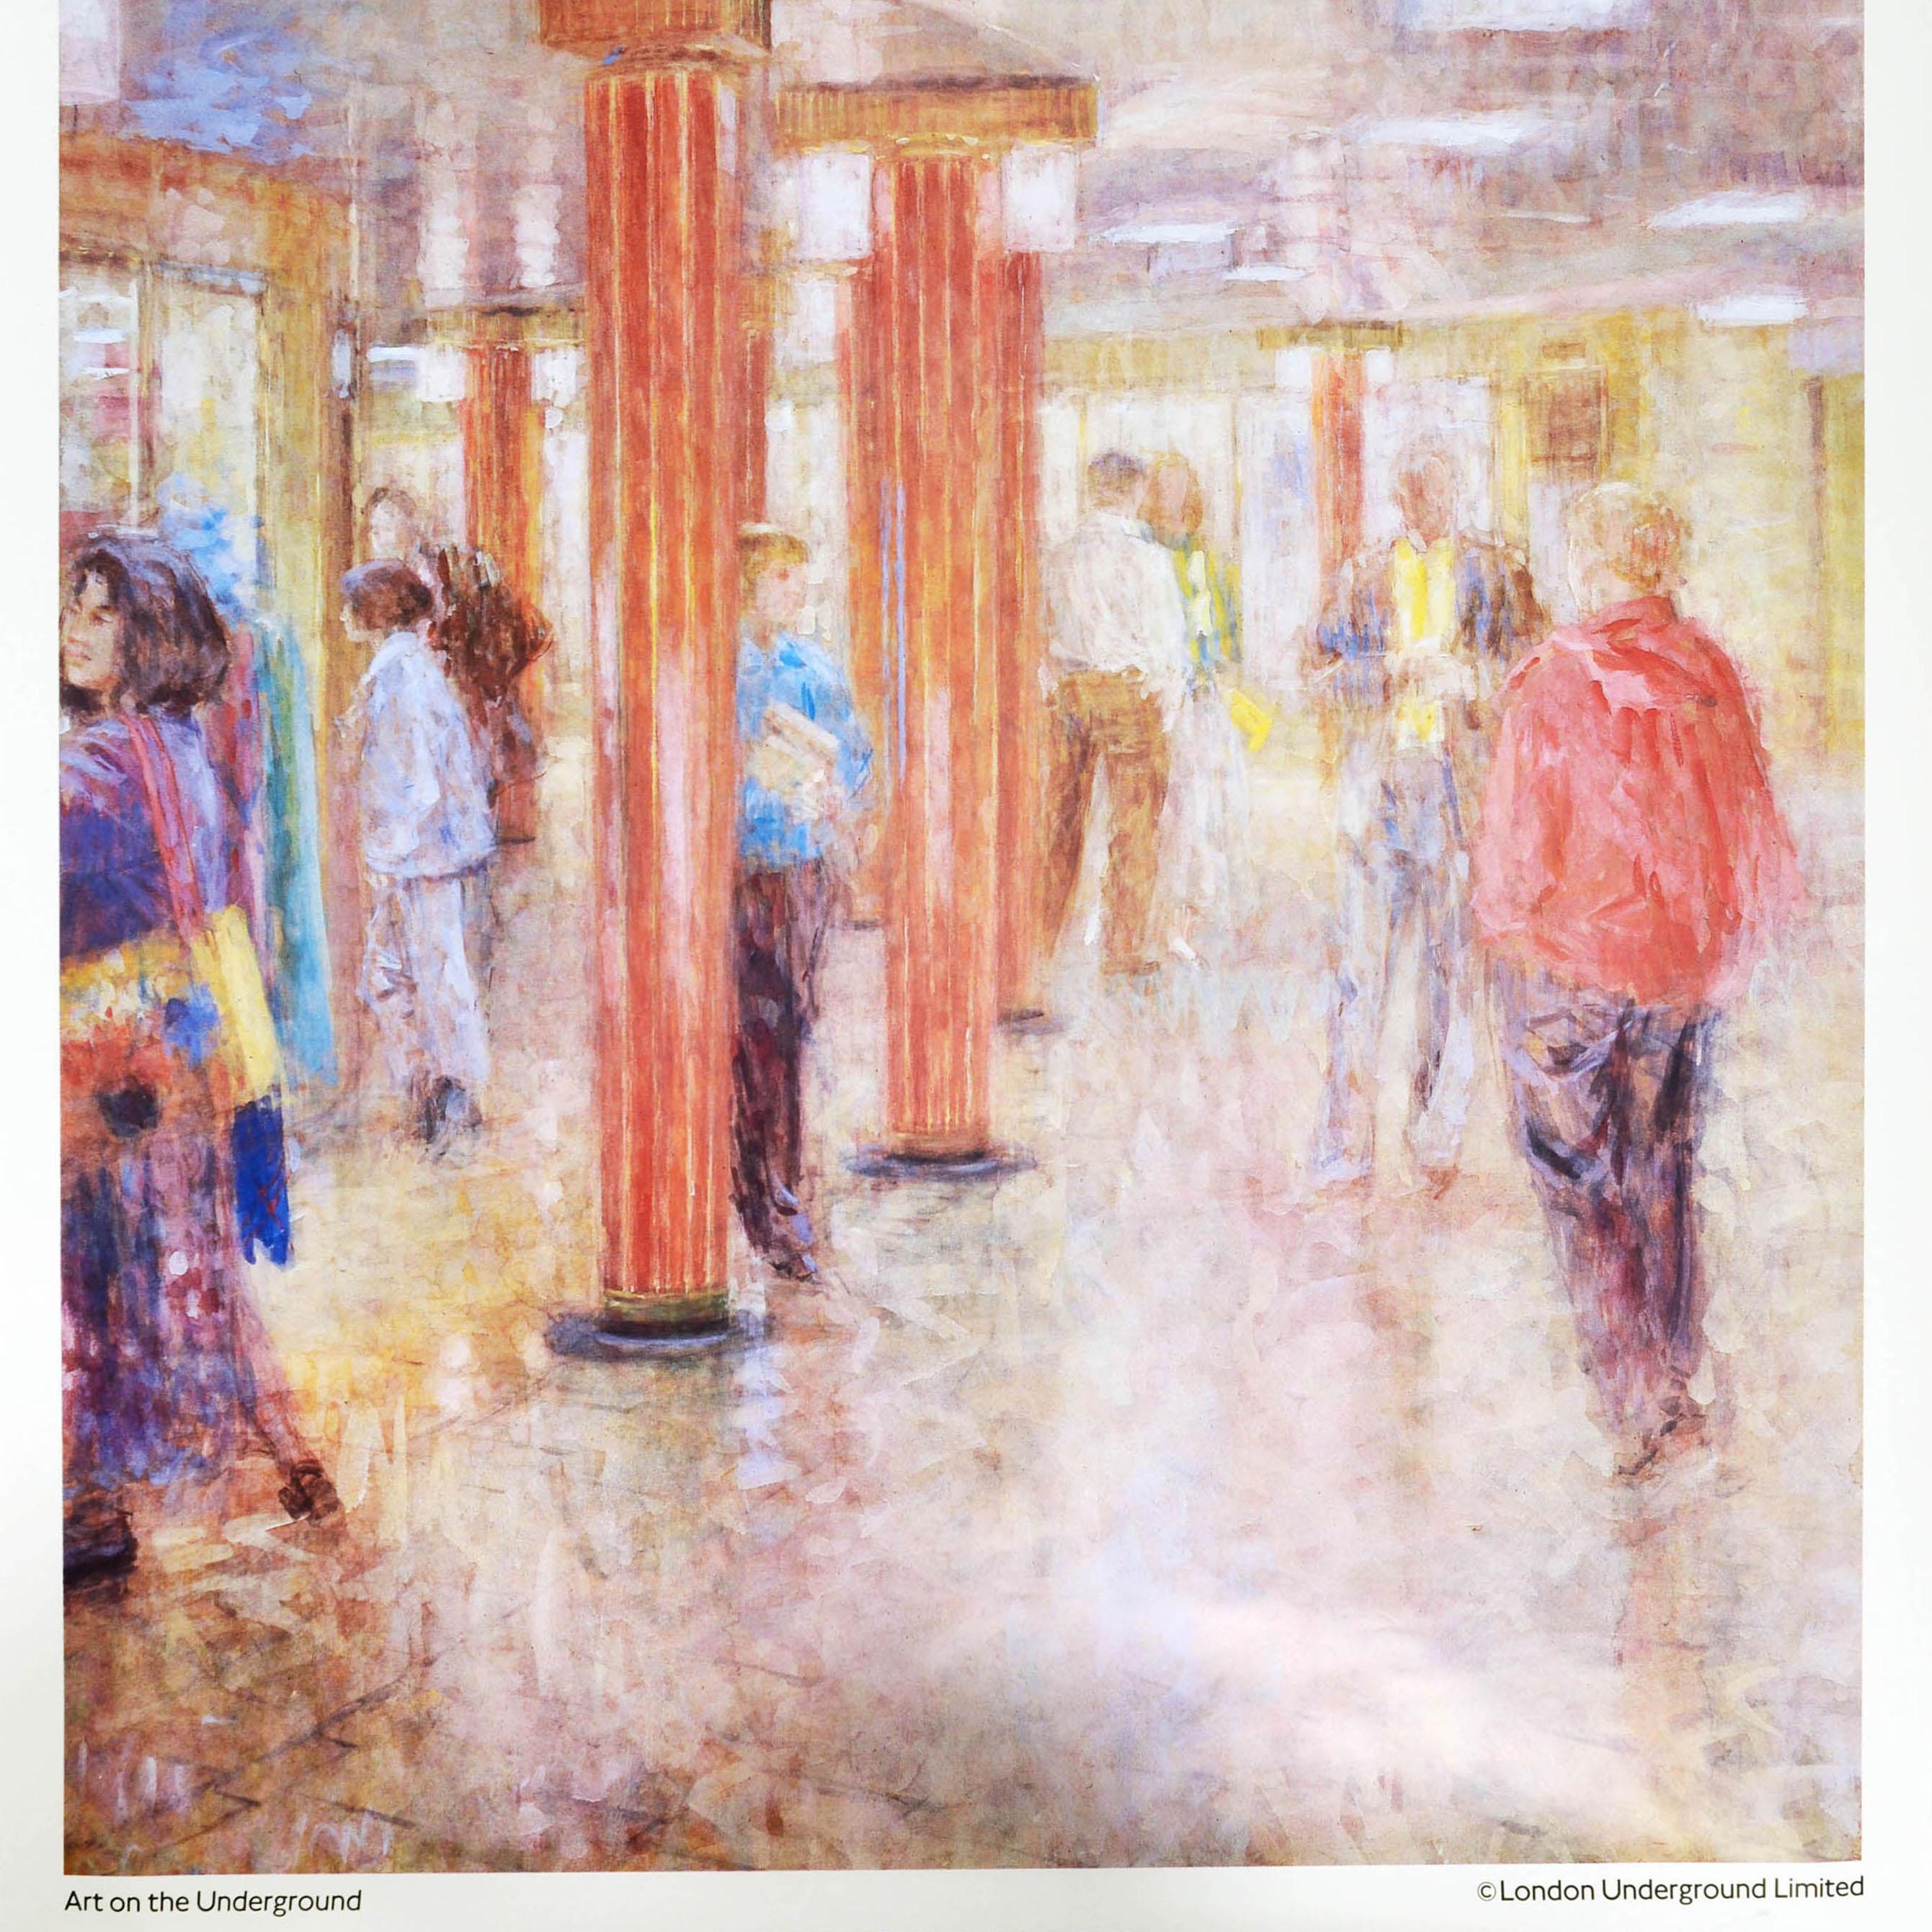 Original vintage London Underground poster - The new Piccadilly Circus - featuring passengers walking in the tube entrance hall between pillars. Piccadilly Circus by Jaqueline Rizvi a new work of art commissioned by London Underground. Art on the